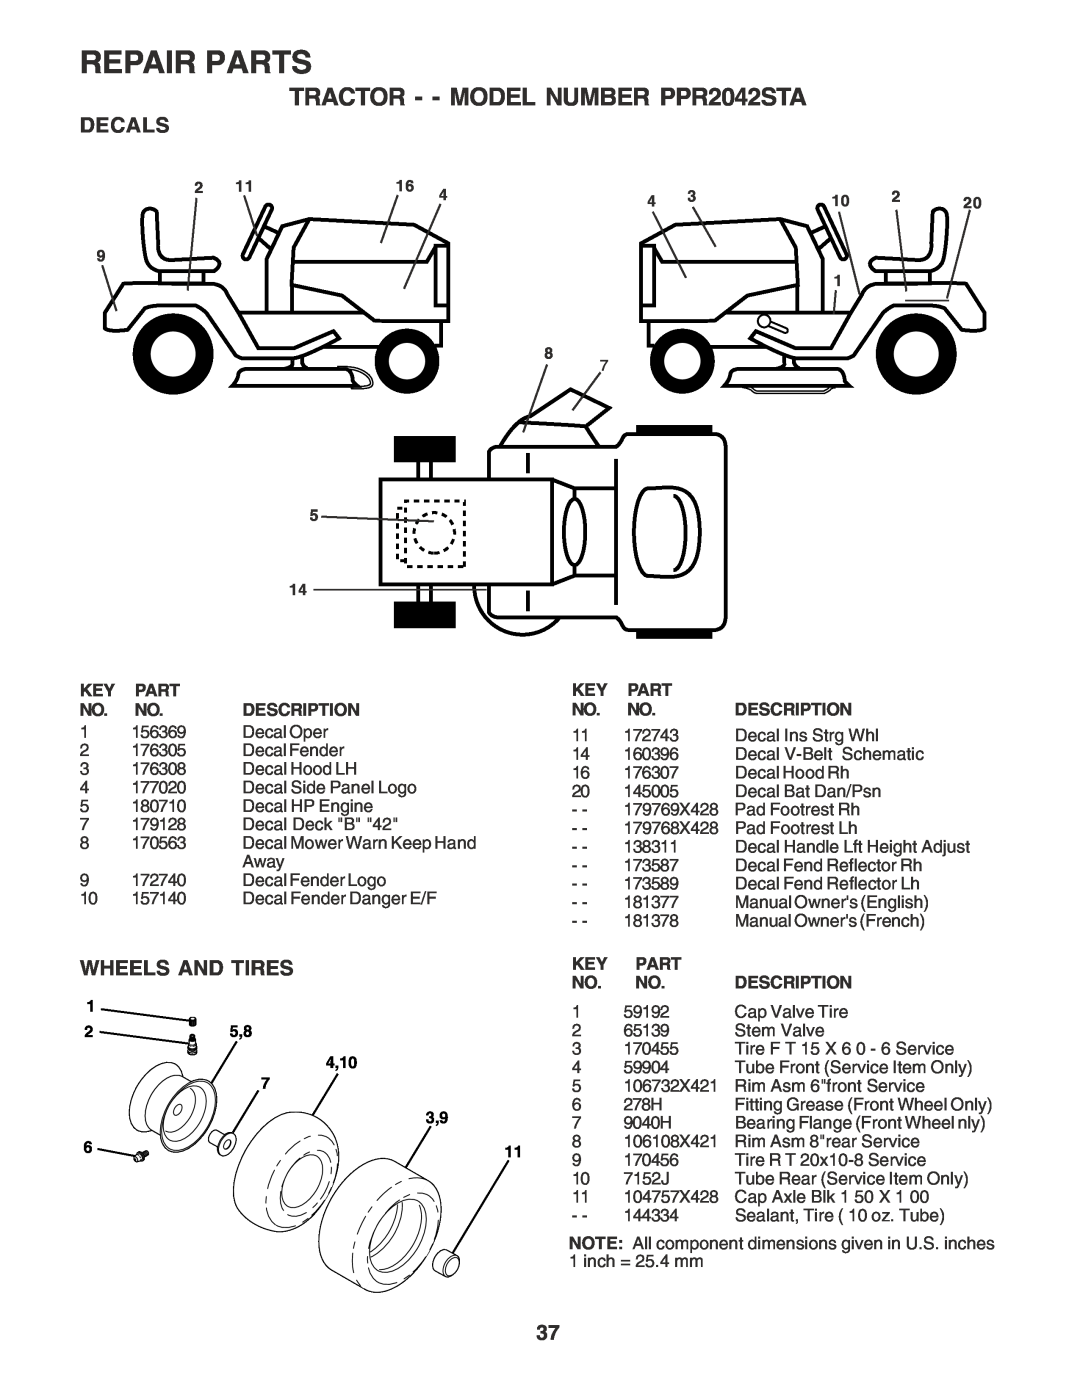 Poulan 181377 owner manual Decals, Wheels And Tires, Repair Parts, TRACTOR - - MODEL NUMBER PPR2042STA, Description 